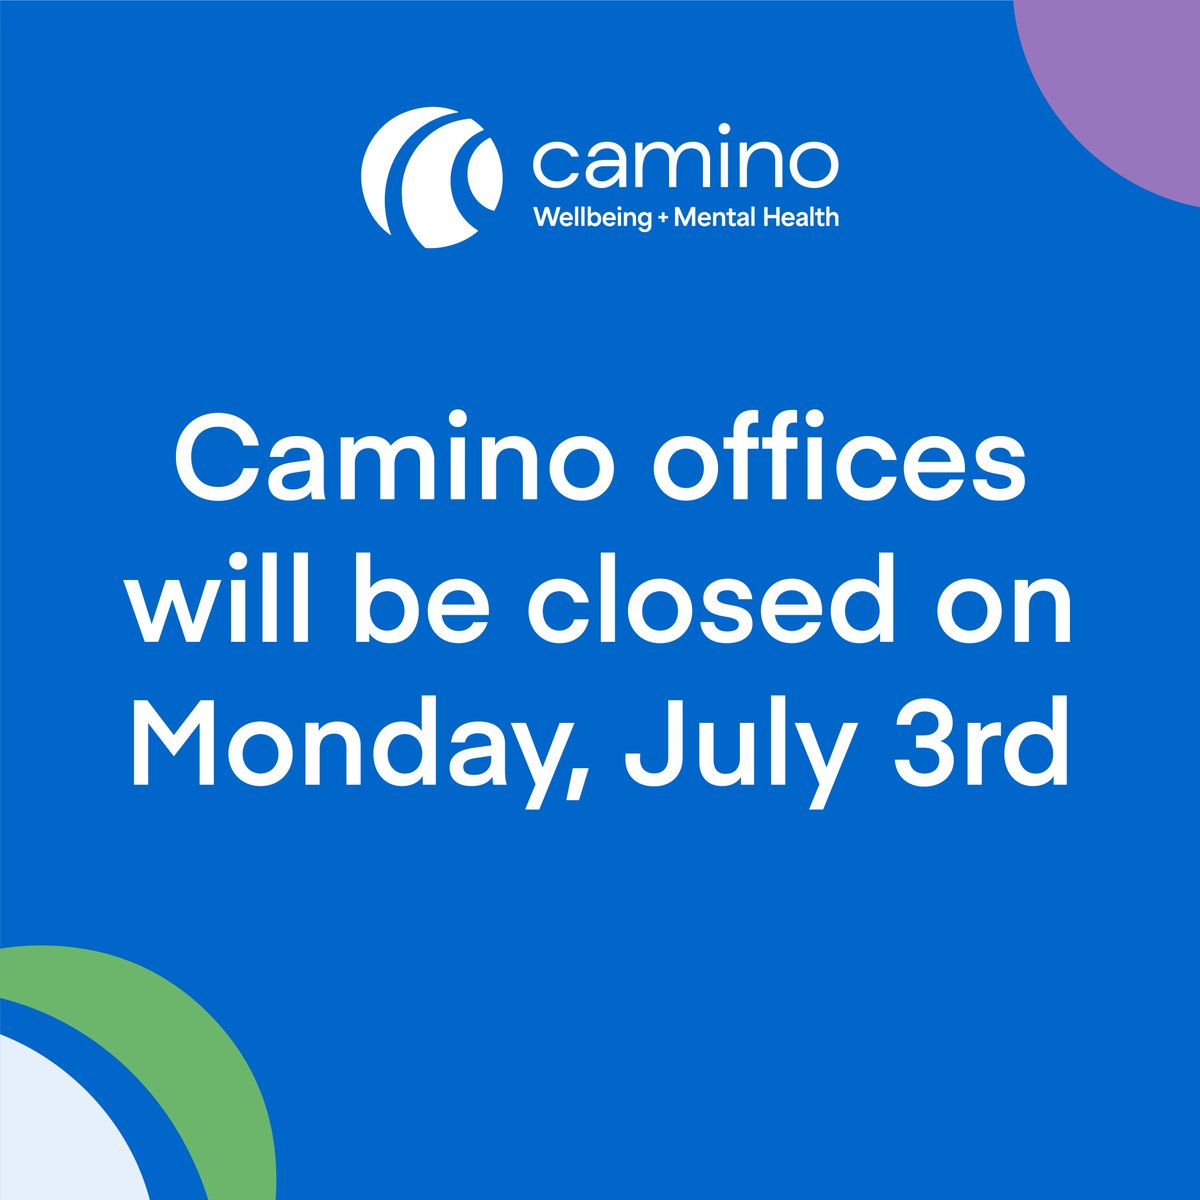 [Follow @CaminoWellbeing for new updates. This account will be inactive soon.] Canada Day falls on a Saturday this year. Camino will be observing Monday, July 3rd as the stat holiday.